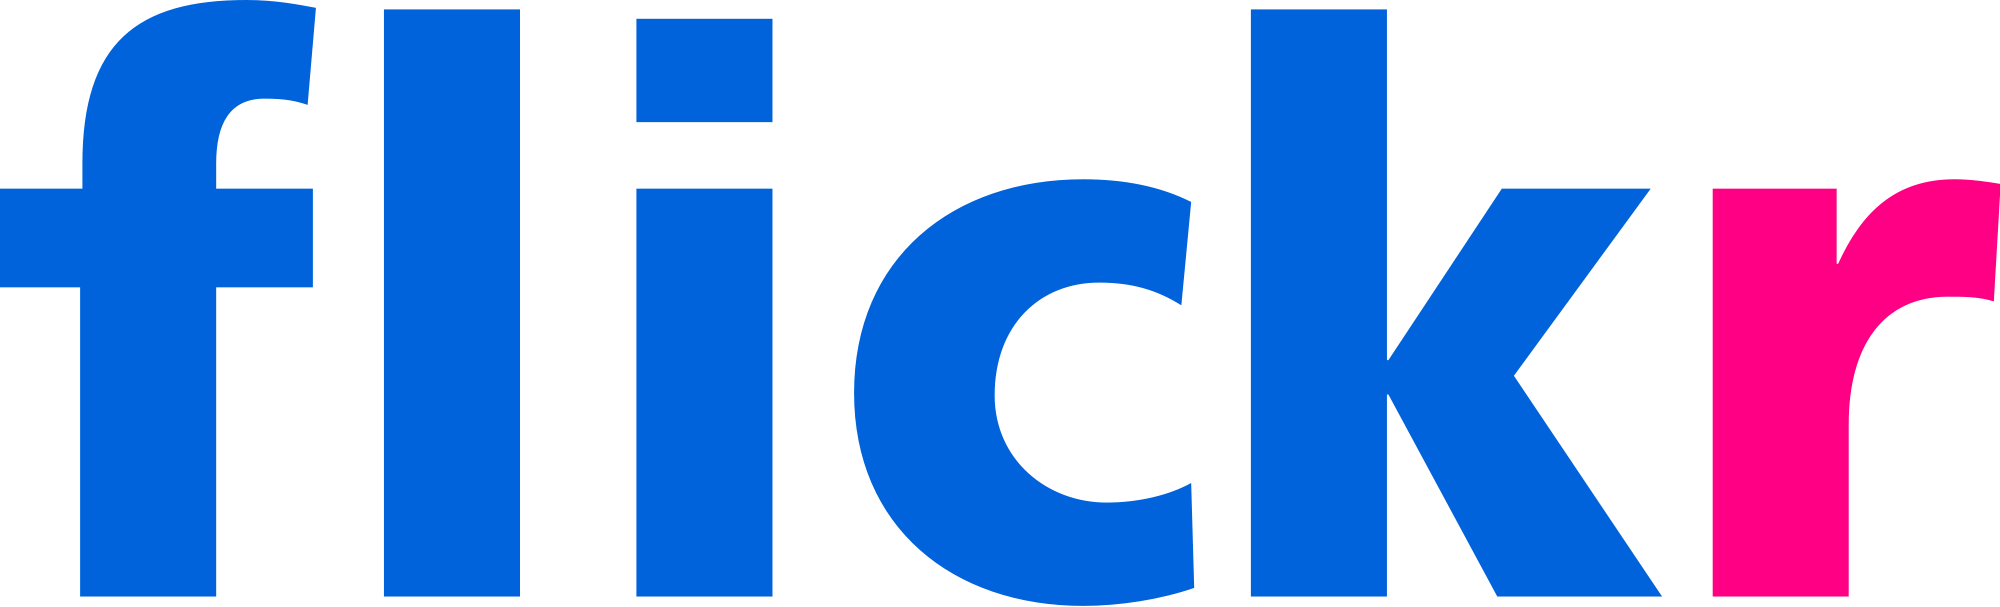 Flickr Logo - File:Flickr logo.png - Wikimedia Commons